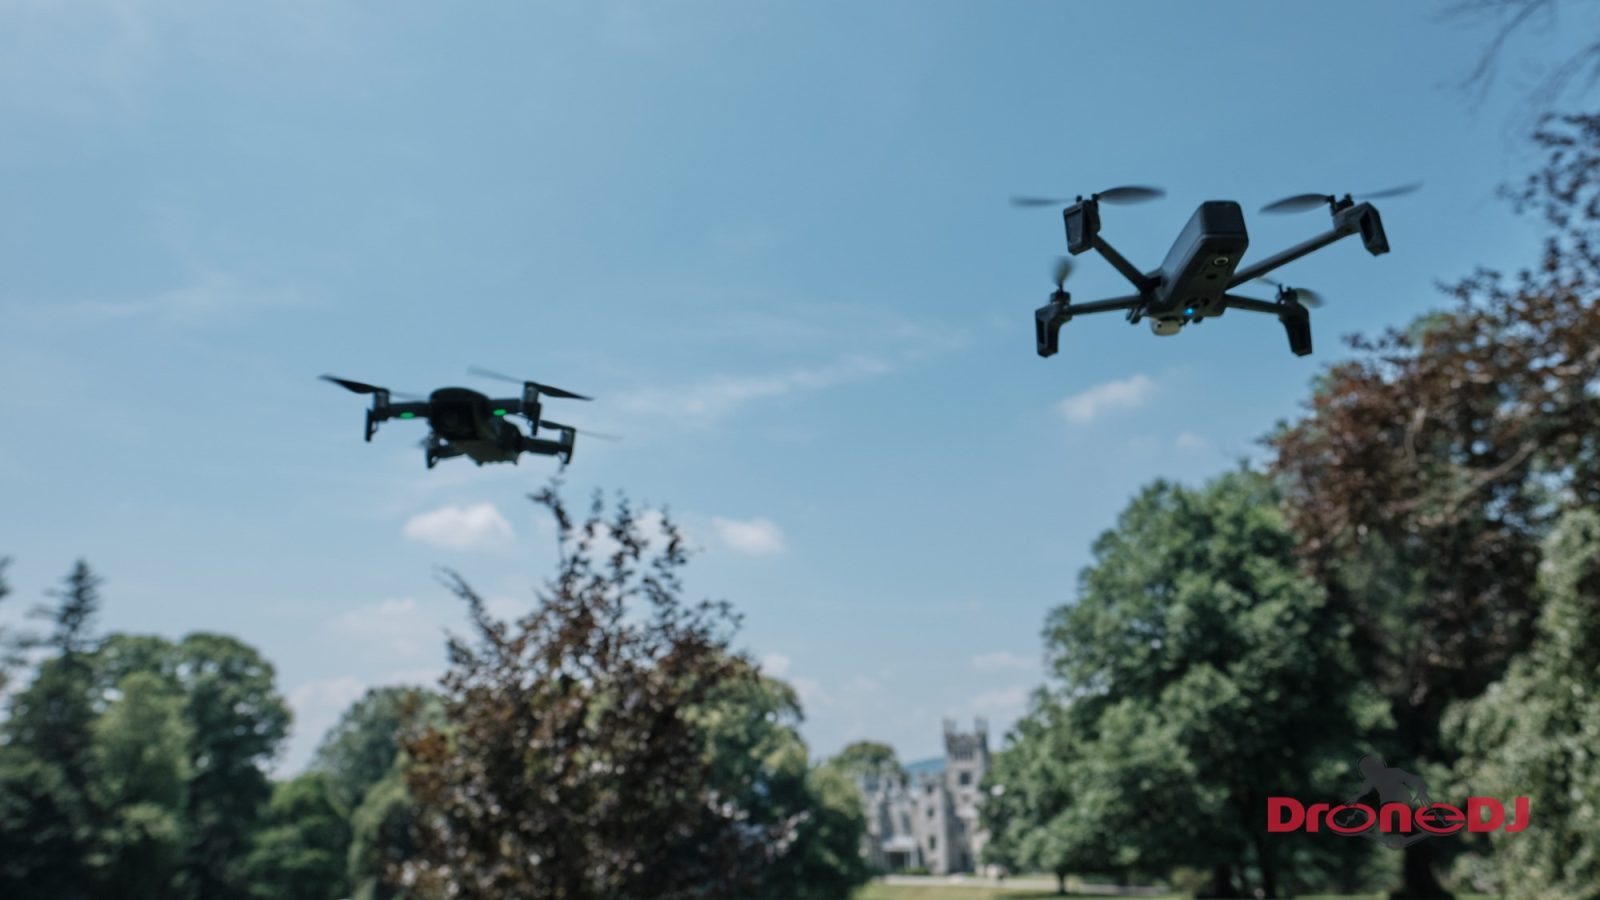 The best drones of 2019... are yet to be released